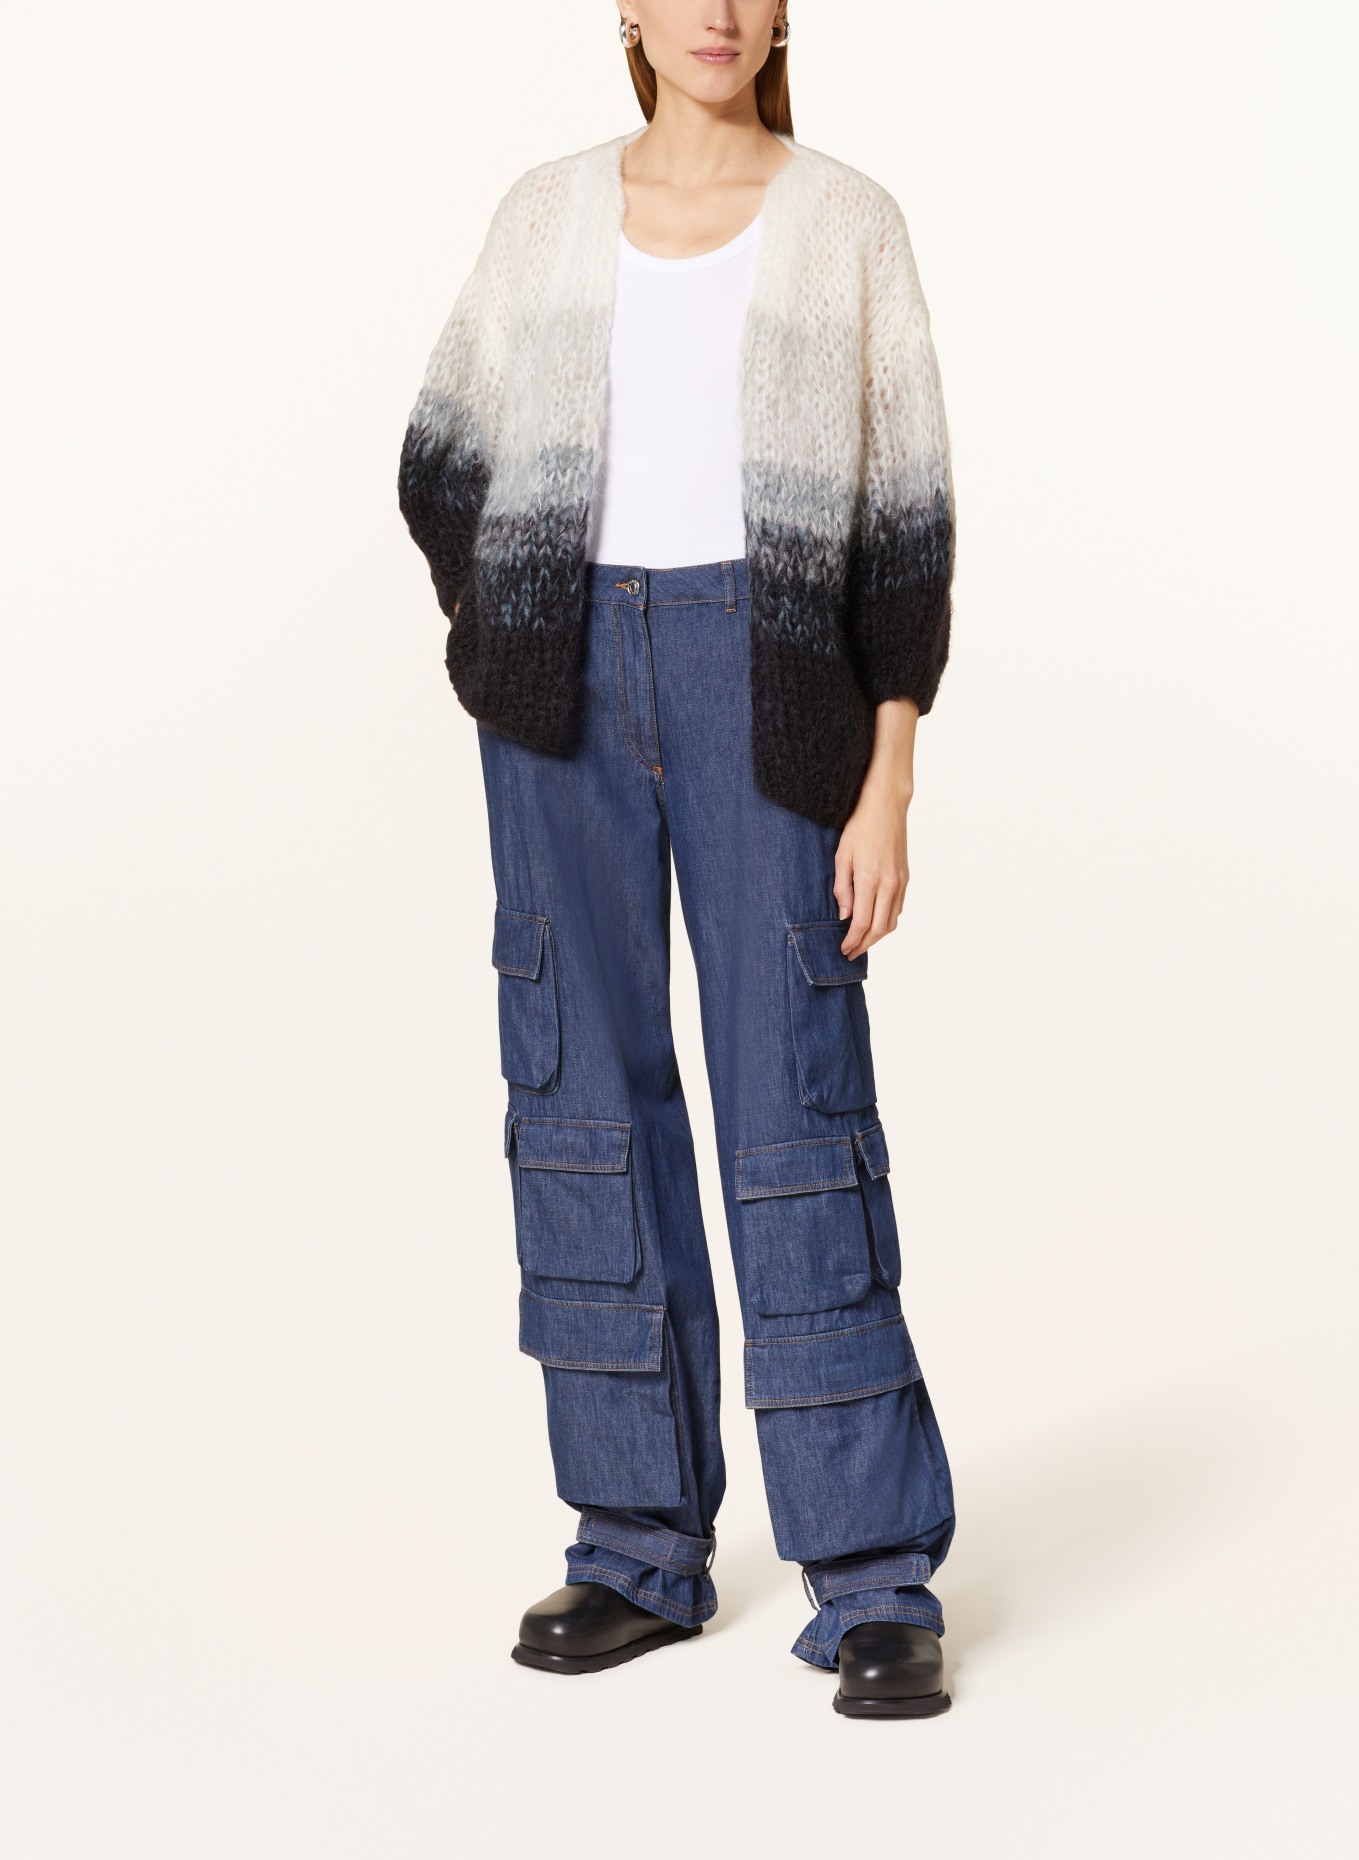 MAIAMI Oversized knit cardigan made of mohair, Color: WHITE/ BLACK/ TEAL (Image 2)